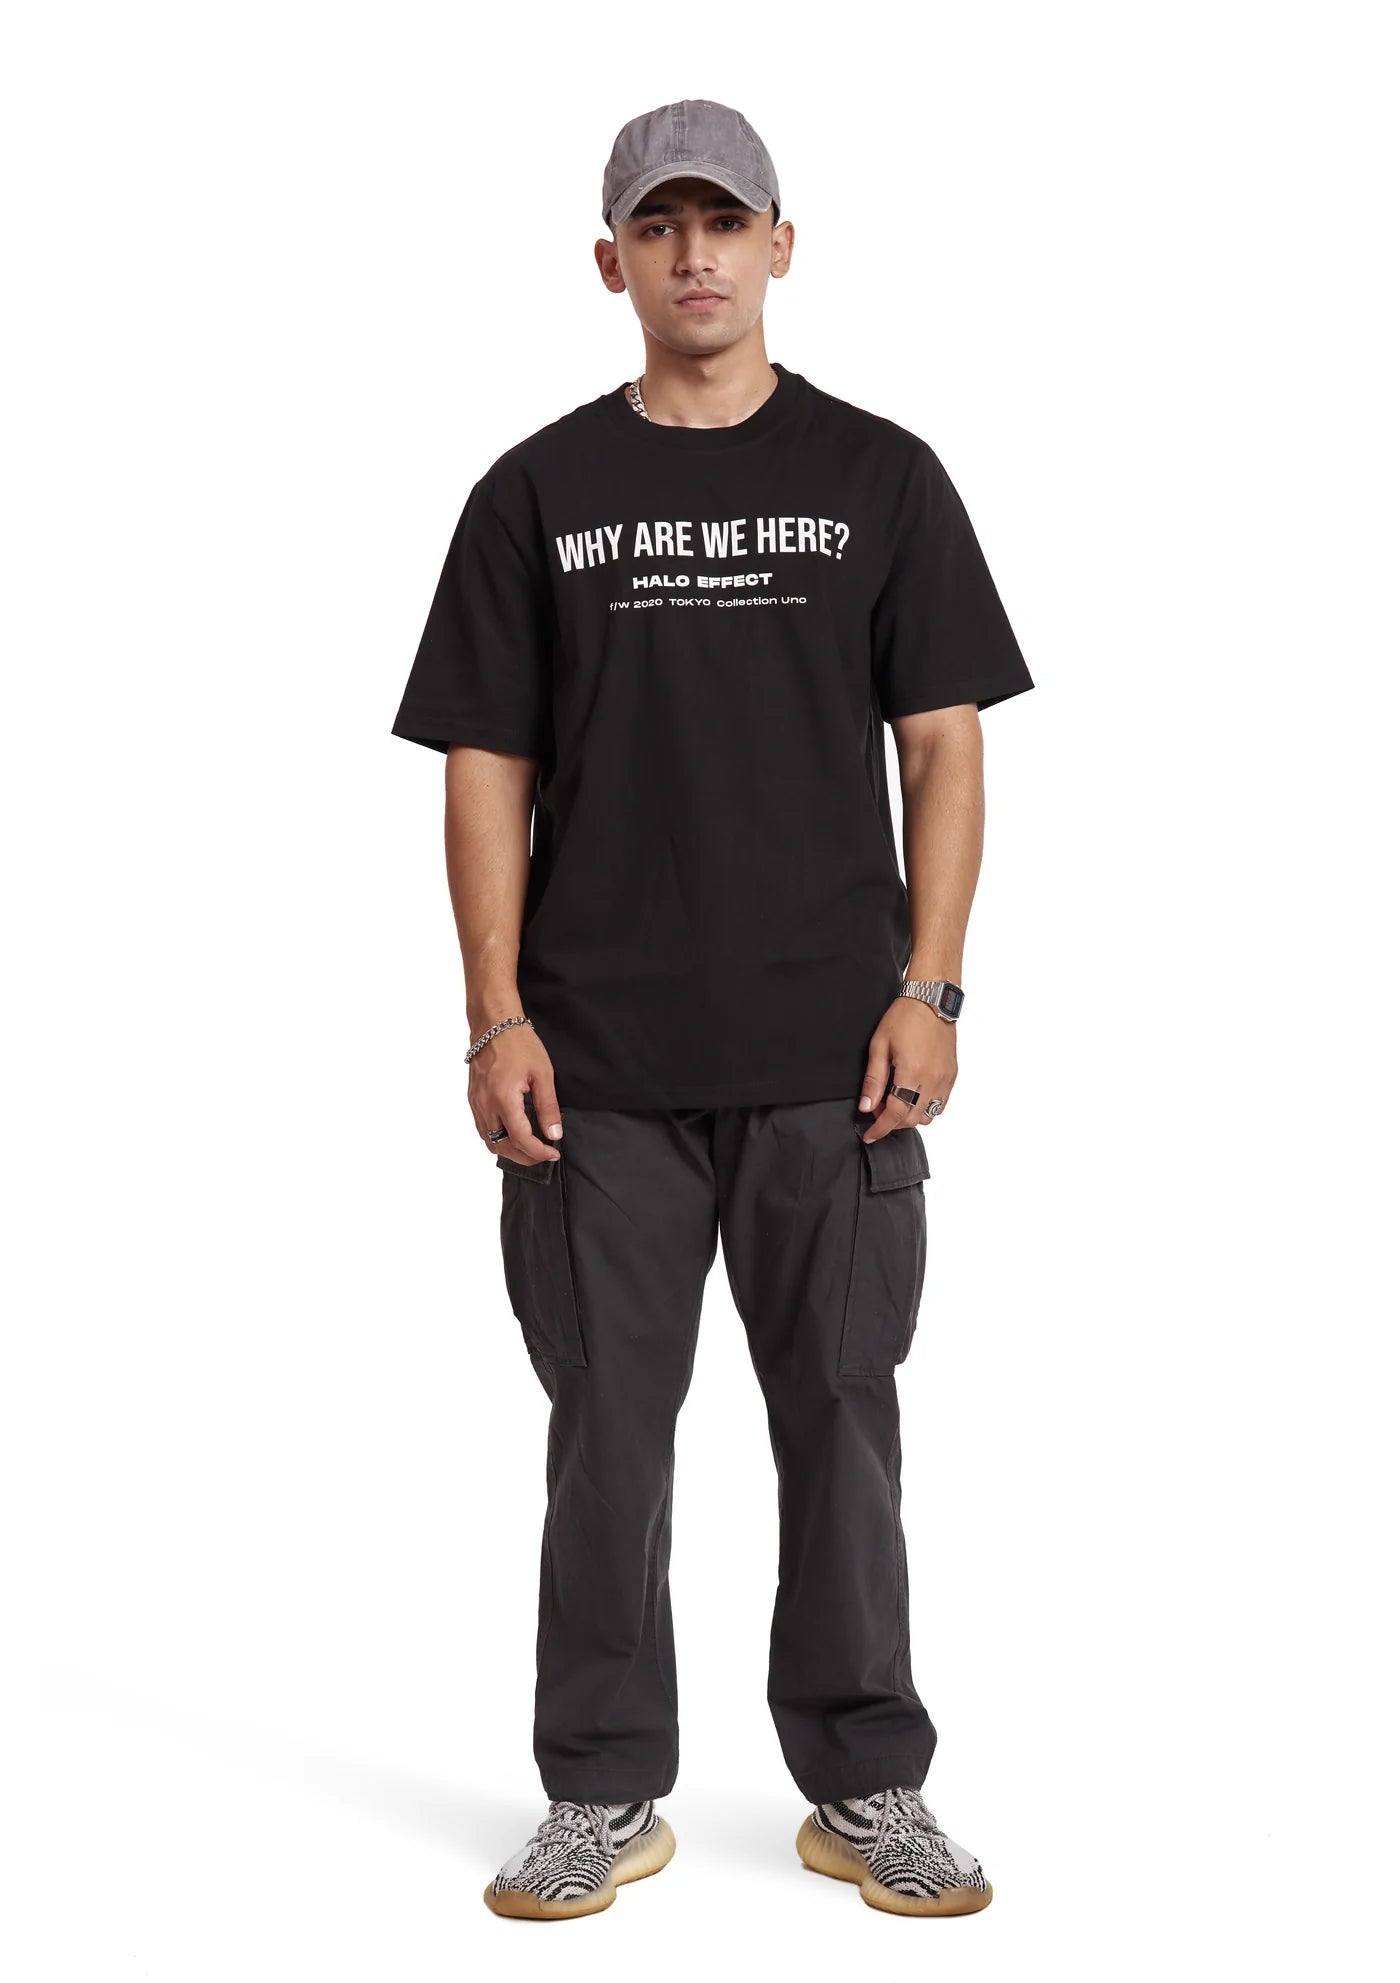 Halo Effect 'Why Are We Here' Black T-Shirt